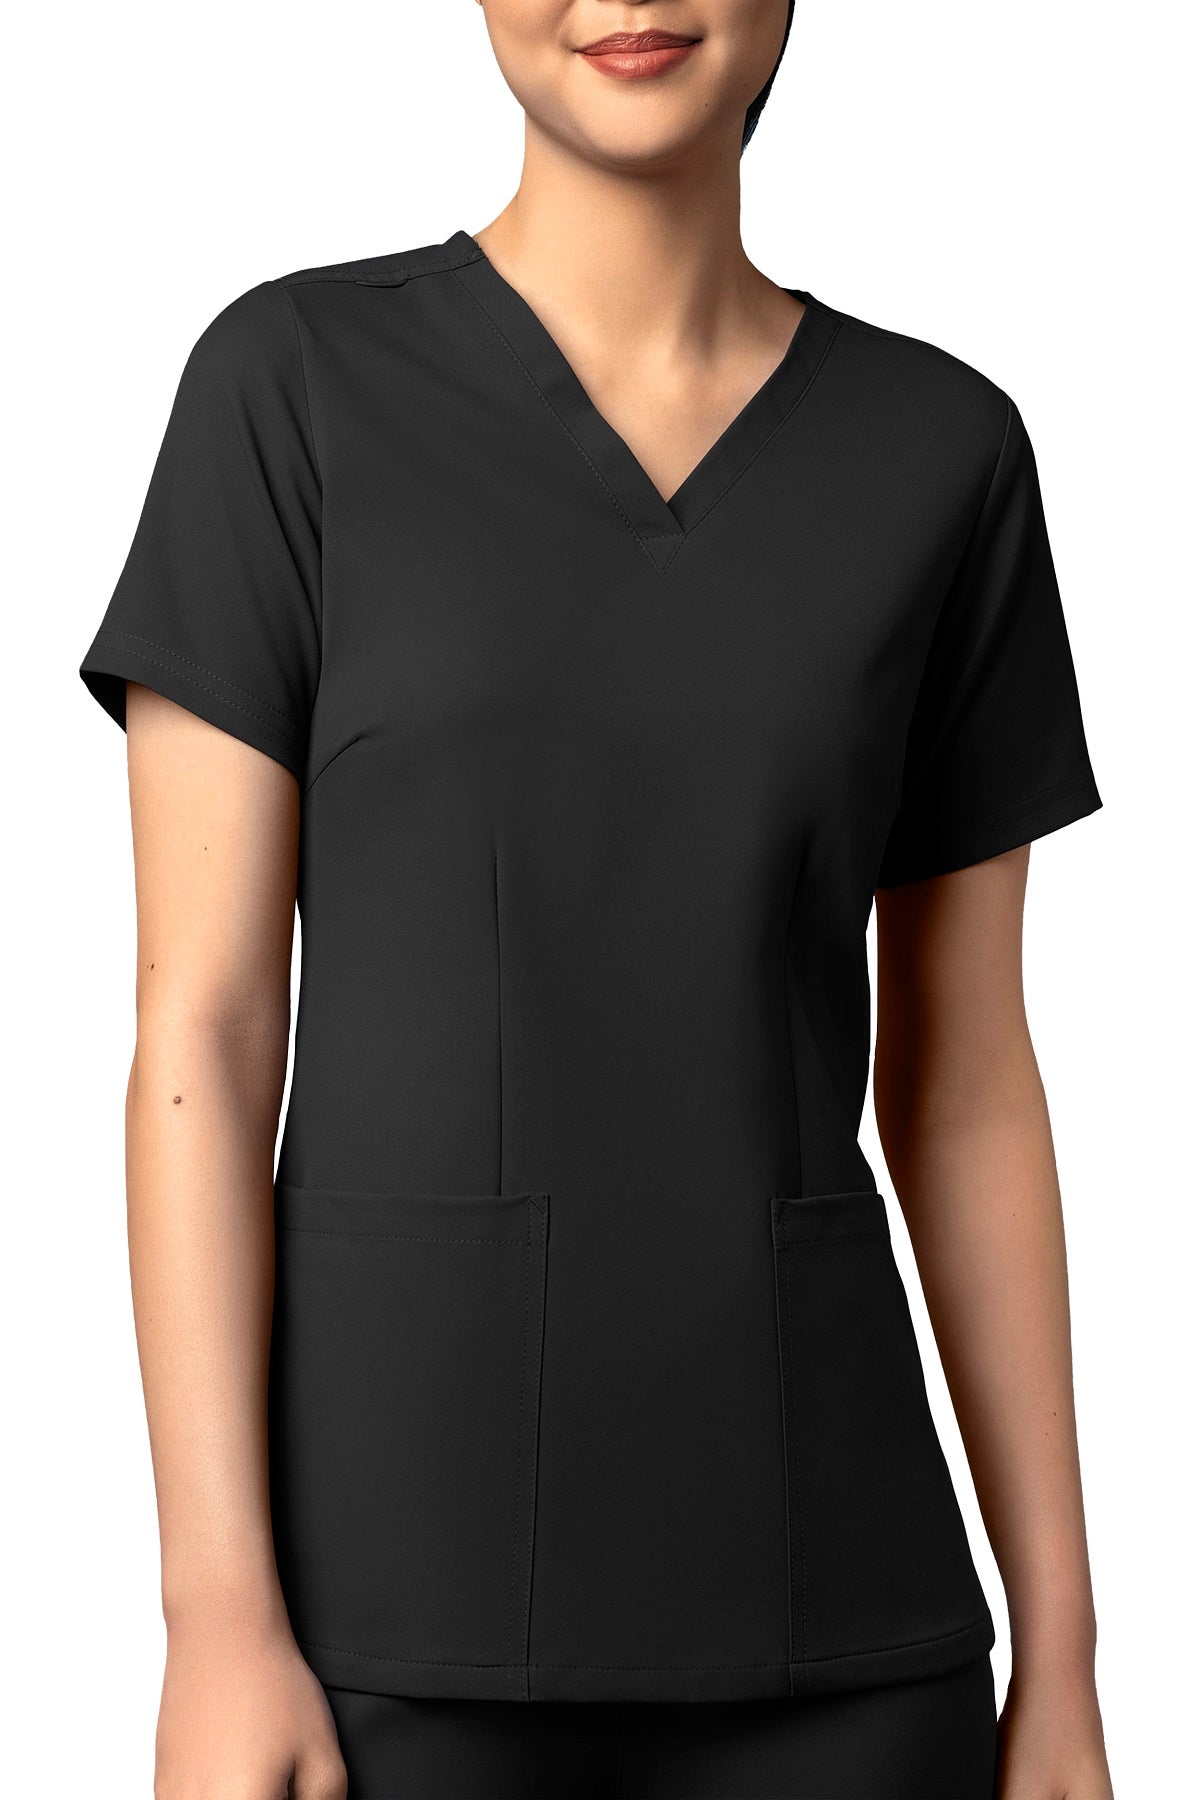 WonderWink Scrub Top Thrive Fitted 3-Pocket in black at Parker's Clothing and Shoes.